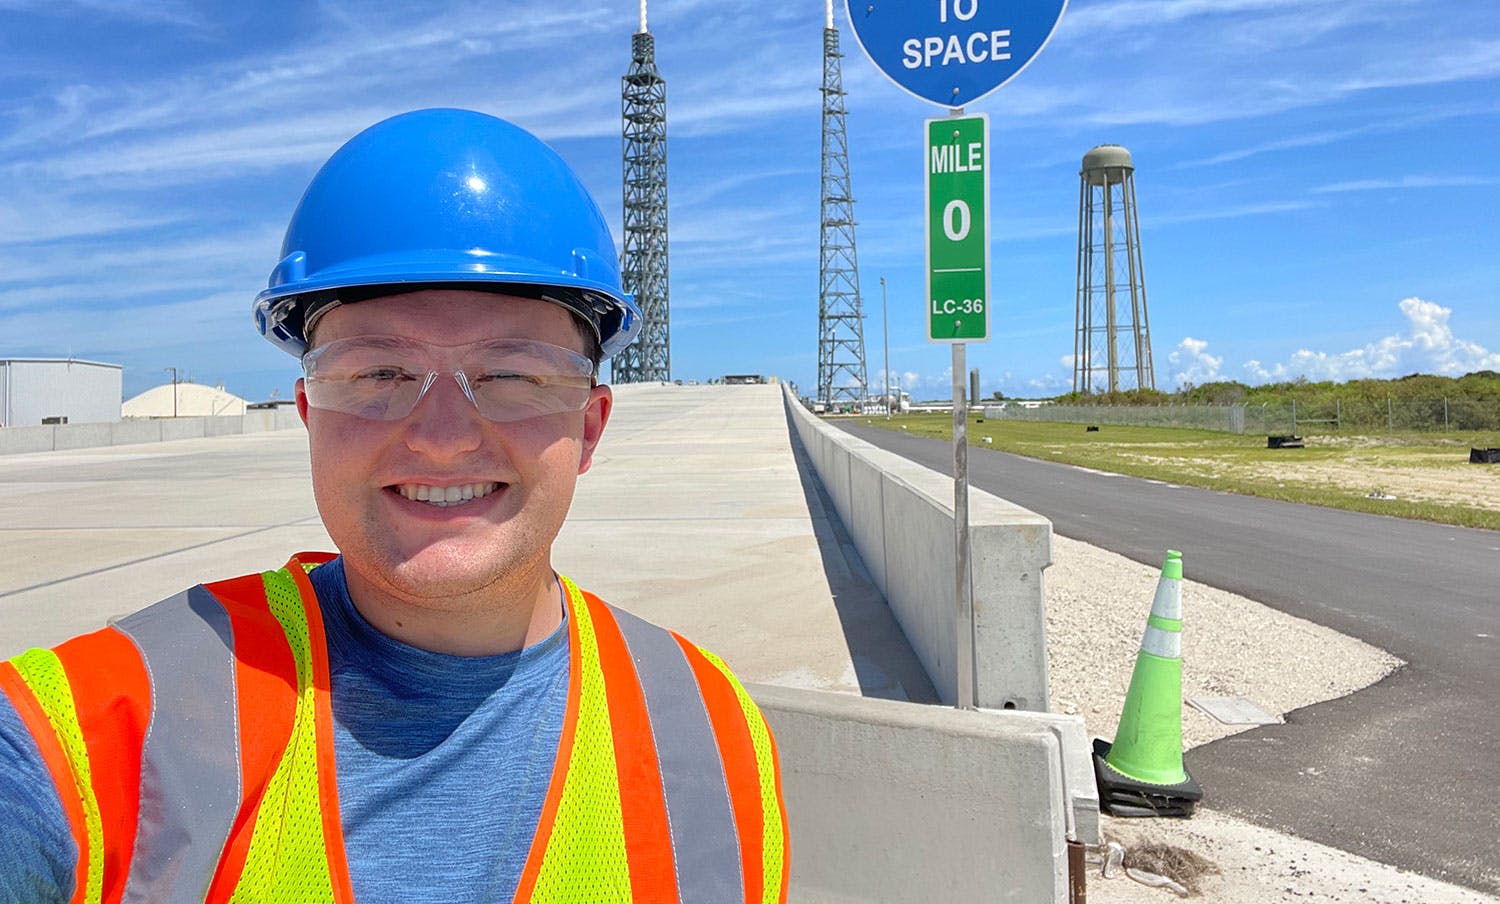 A person in a blue construction hat and safety vest stands in front of the New Glenn launch pad